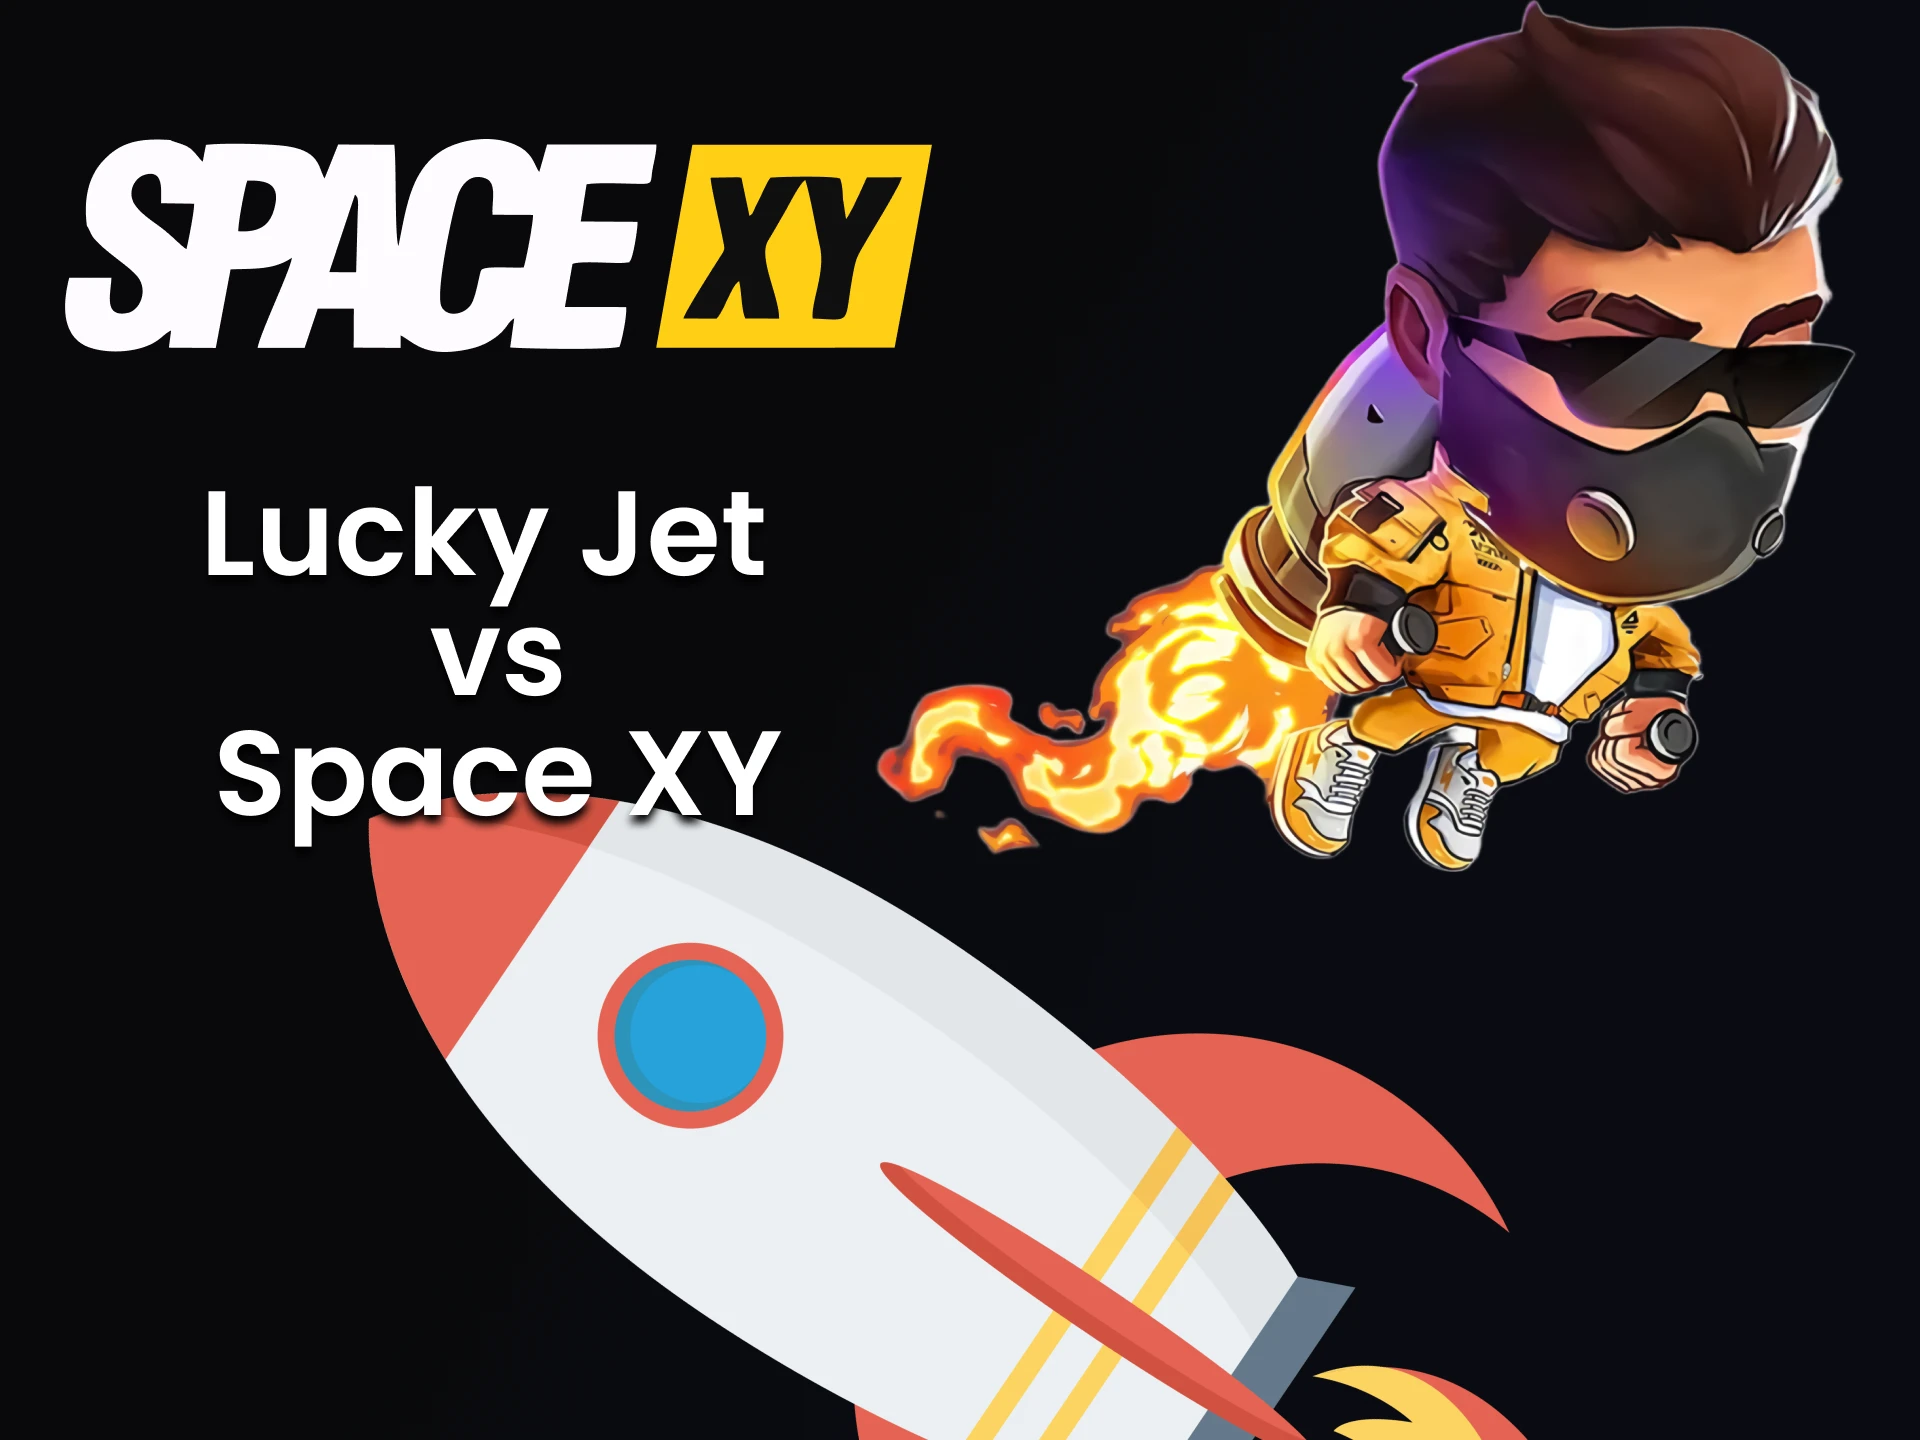 Lucke Jet or Space XY, the choice is yours.